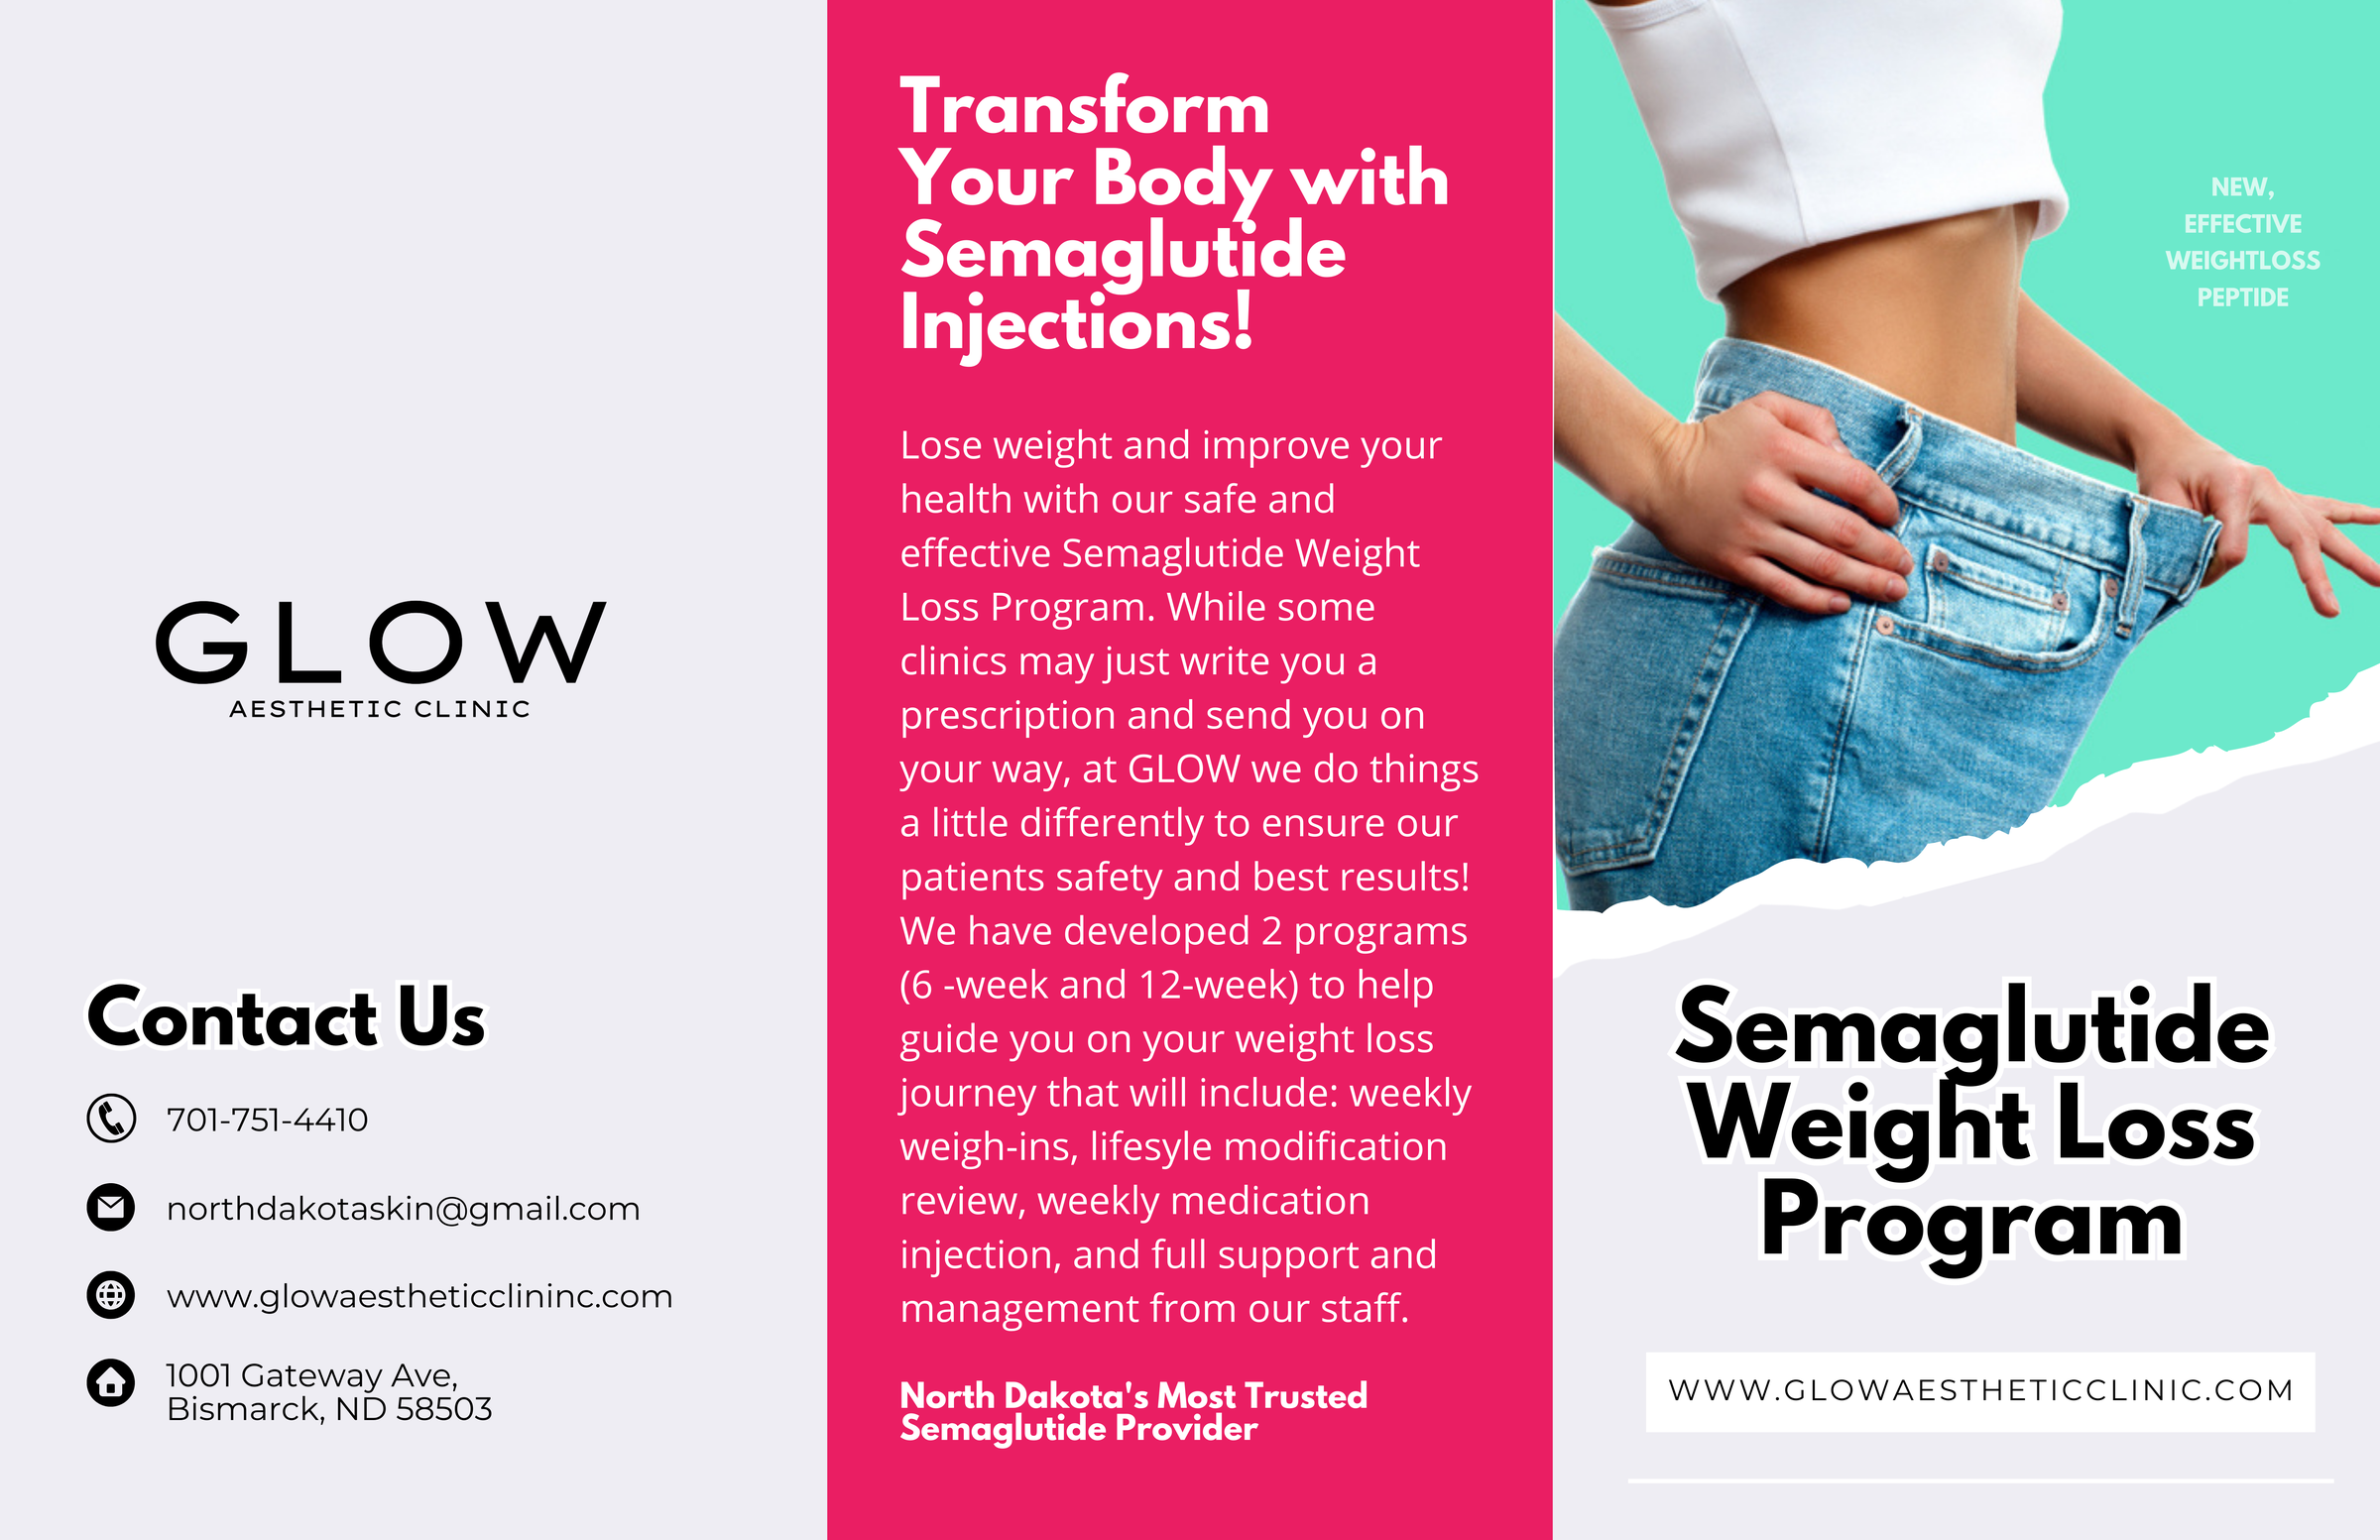 You Can Now Use Your HSA/FSA On Semaglutide Weight Loss! - Complete  Wellness, Missouri City, TX